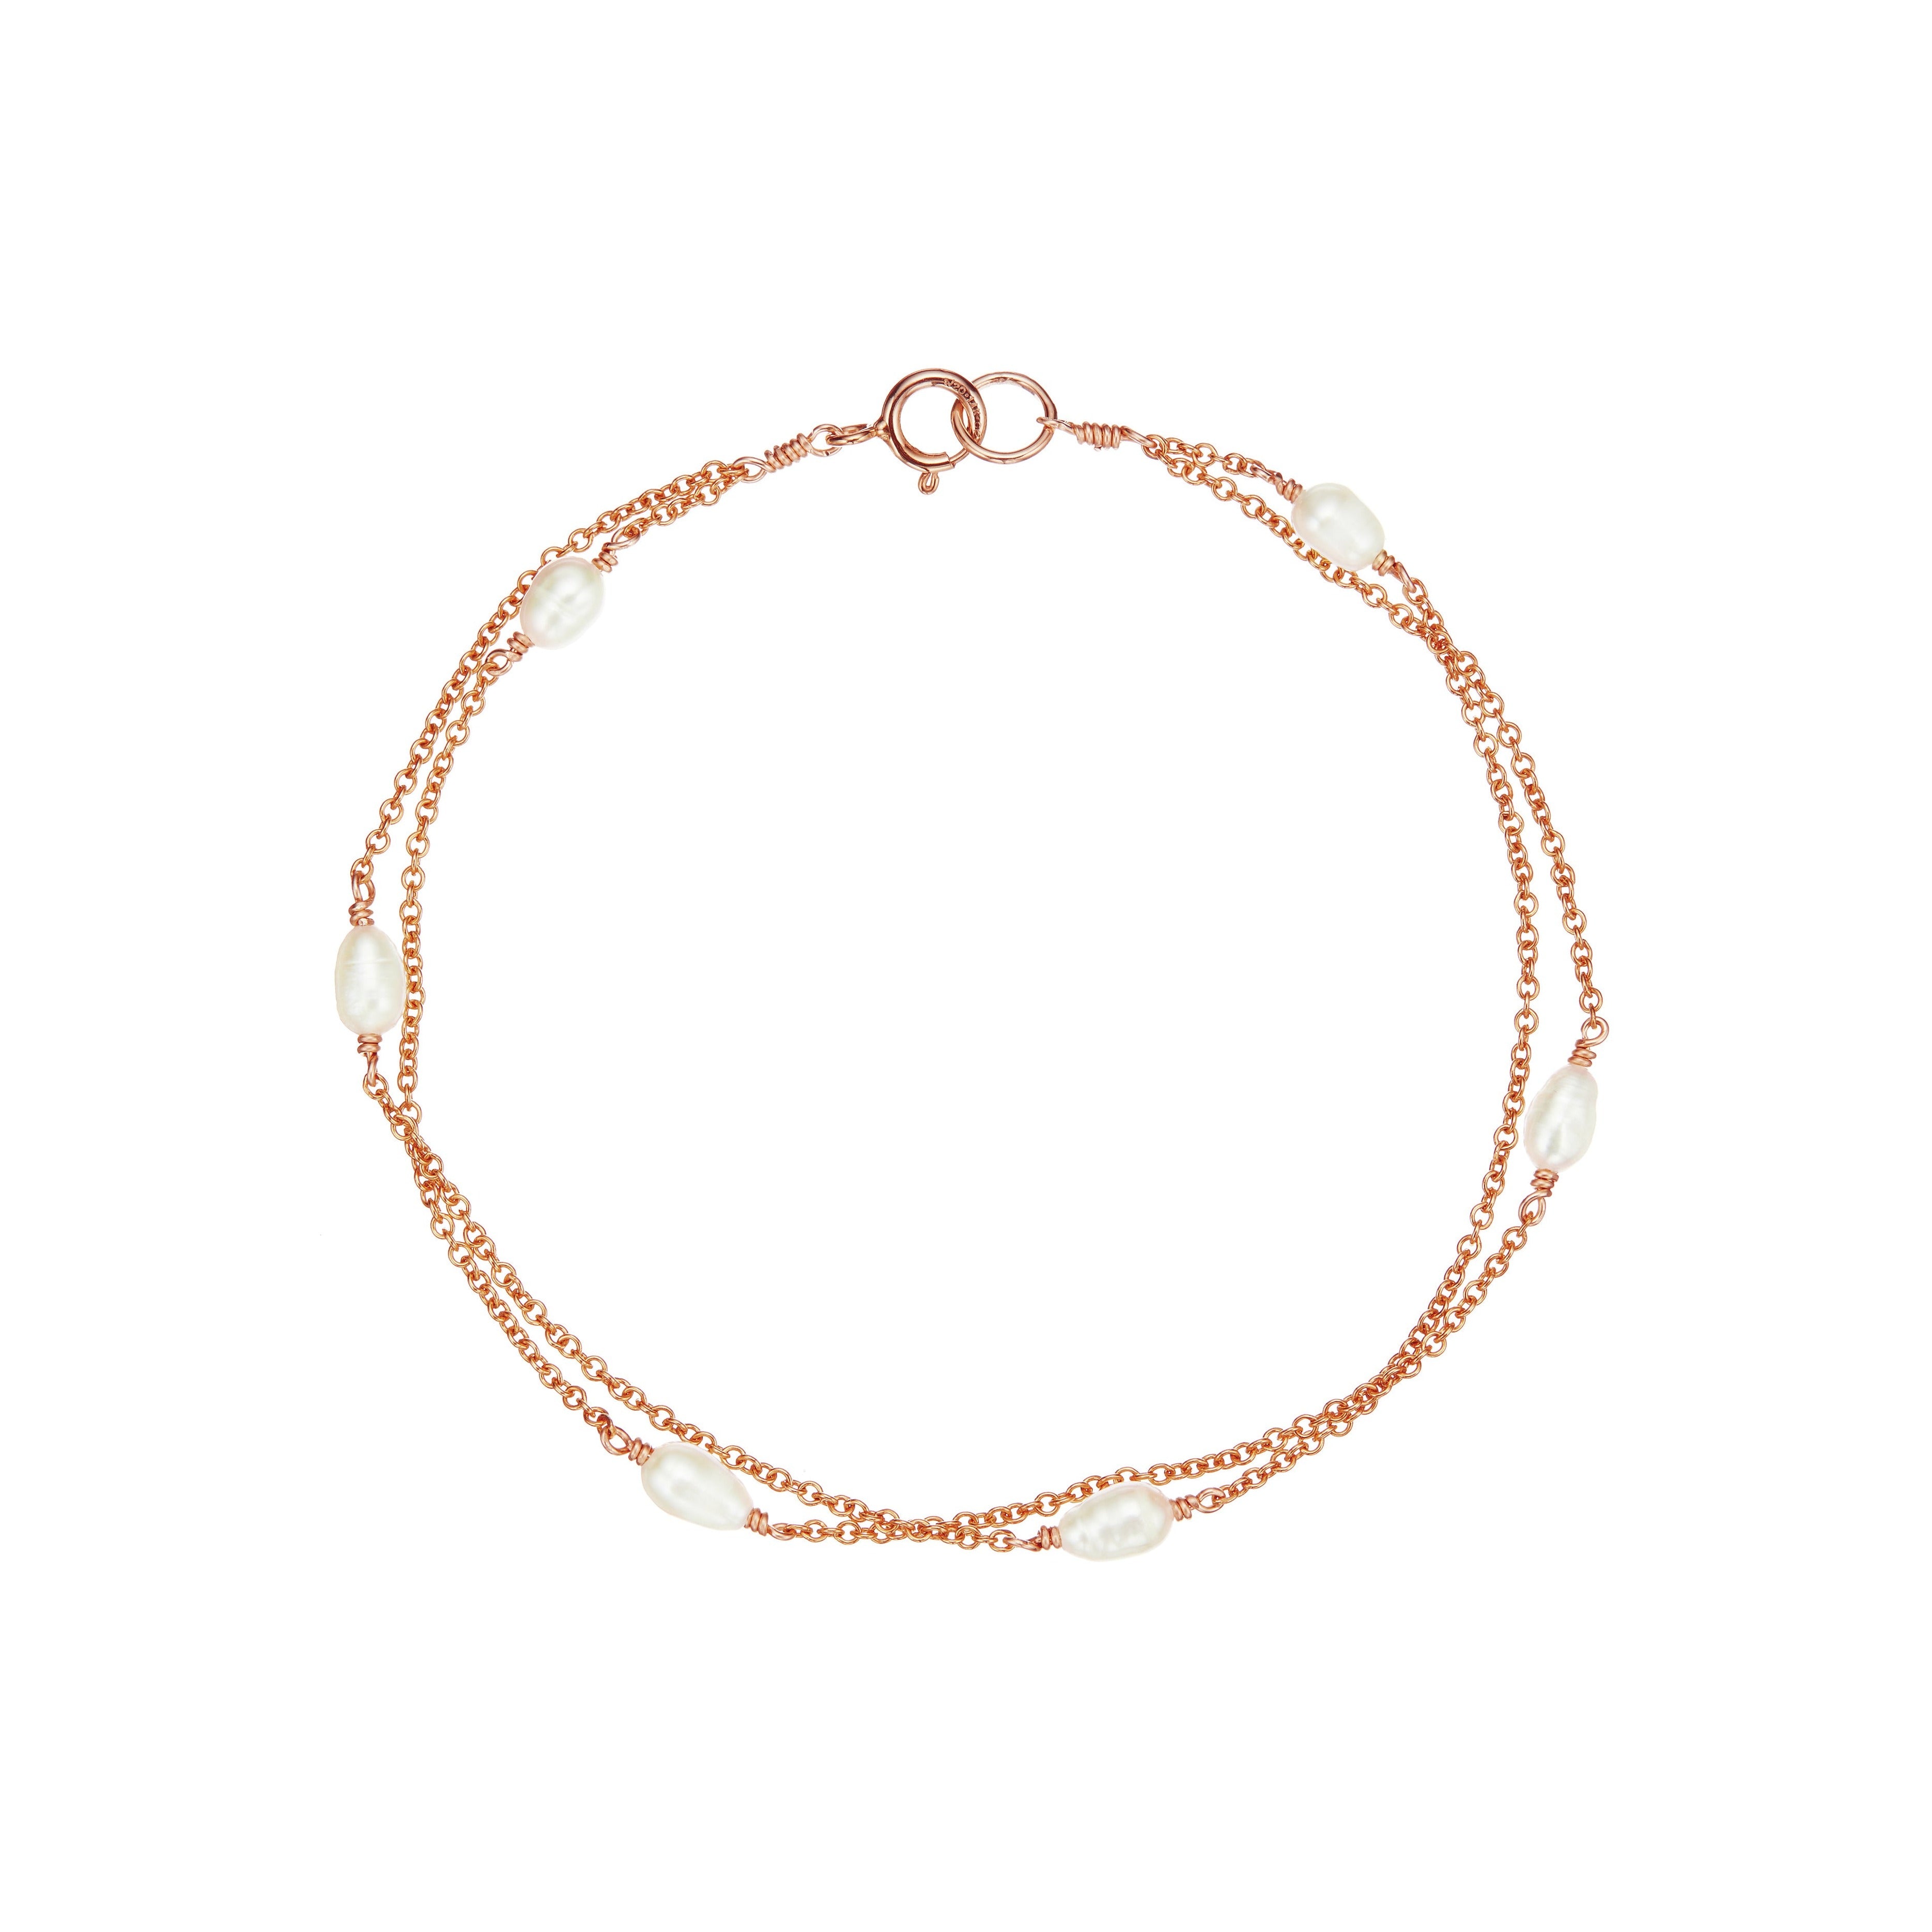 Rose gold layered seed pearl bracelet on a white background